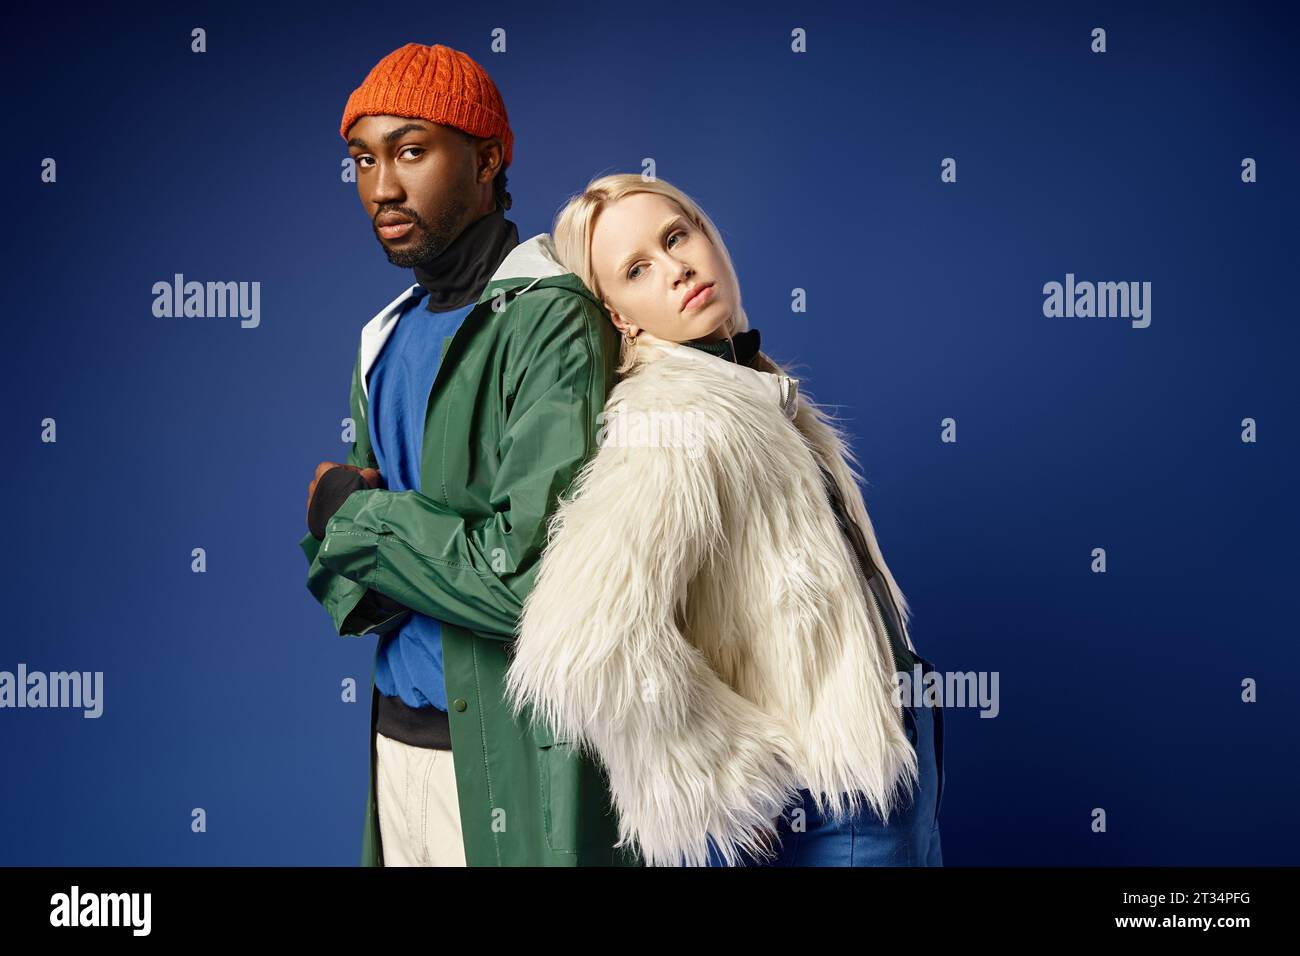 blonde woman leaning on african american man in winter attire, diverse couple on blue backdrop Stock Photo